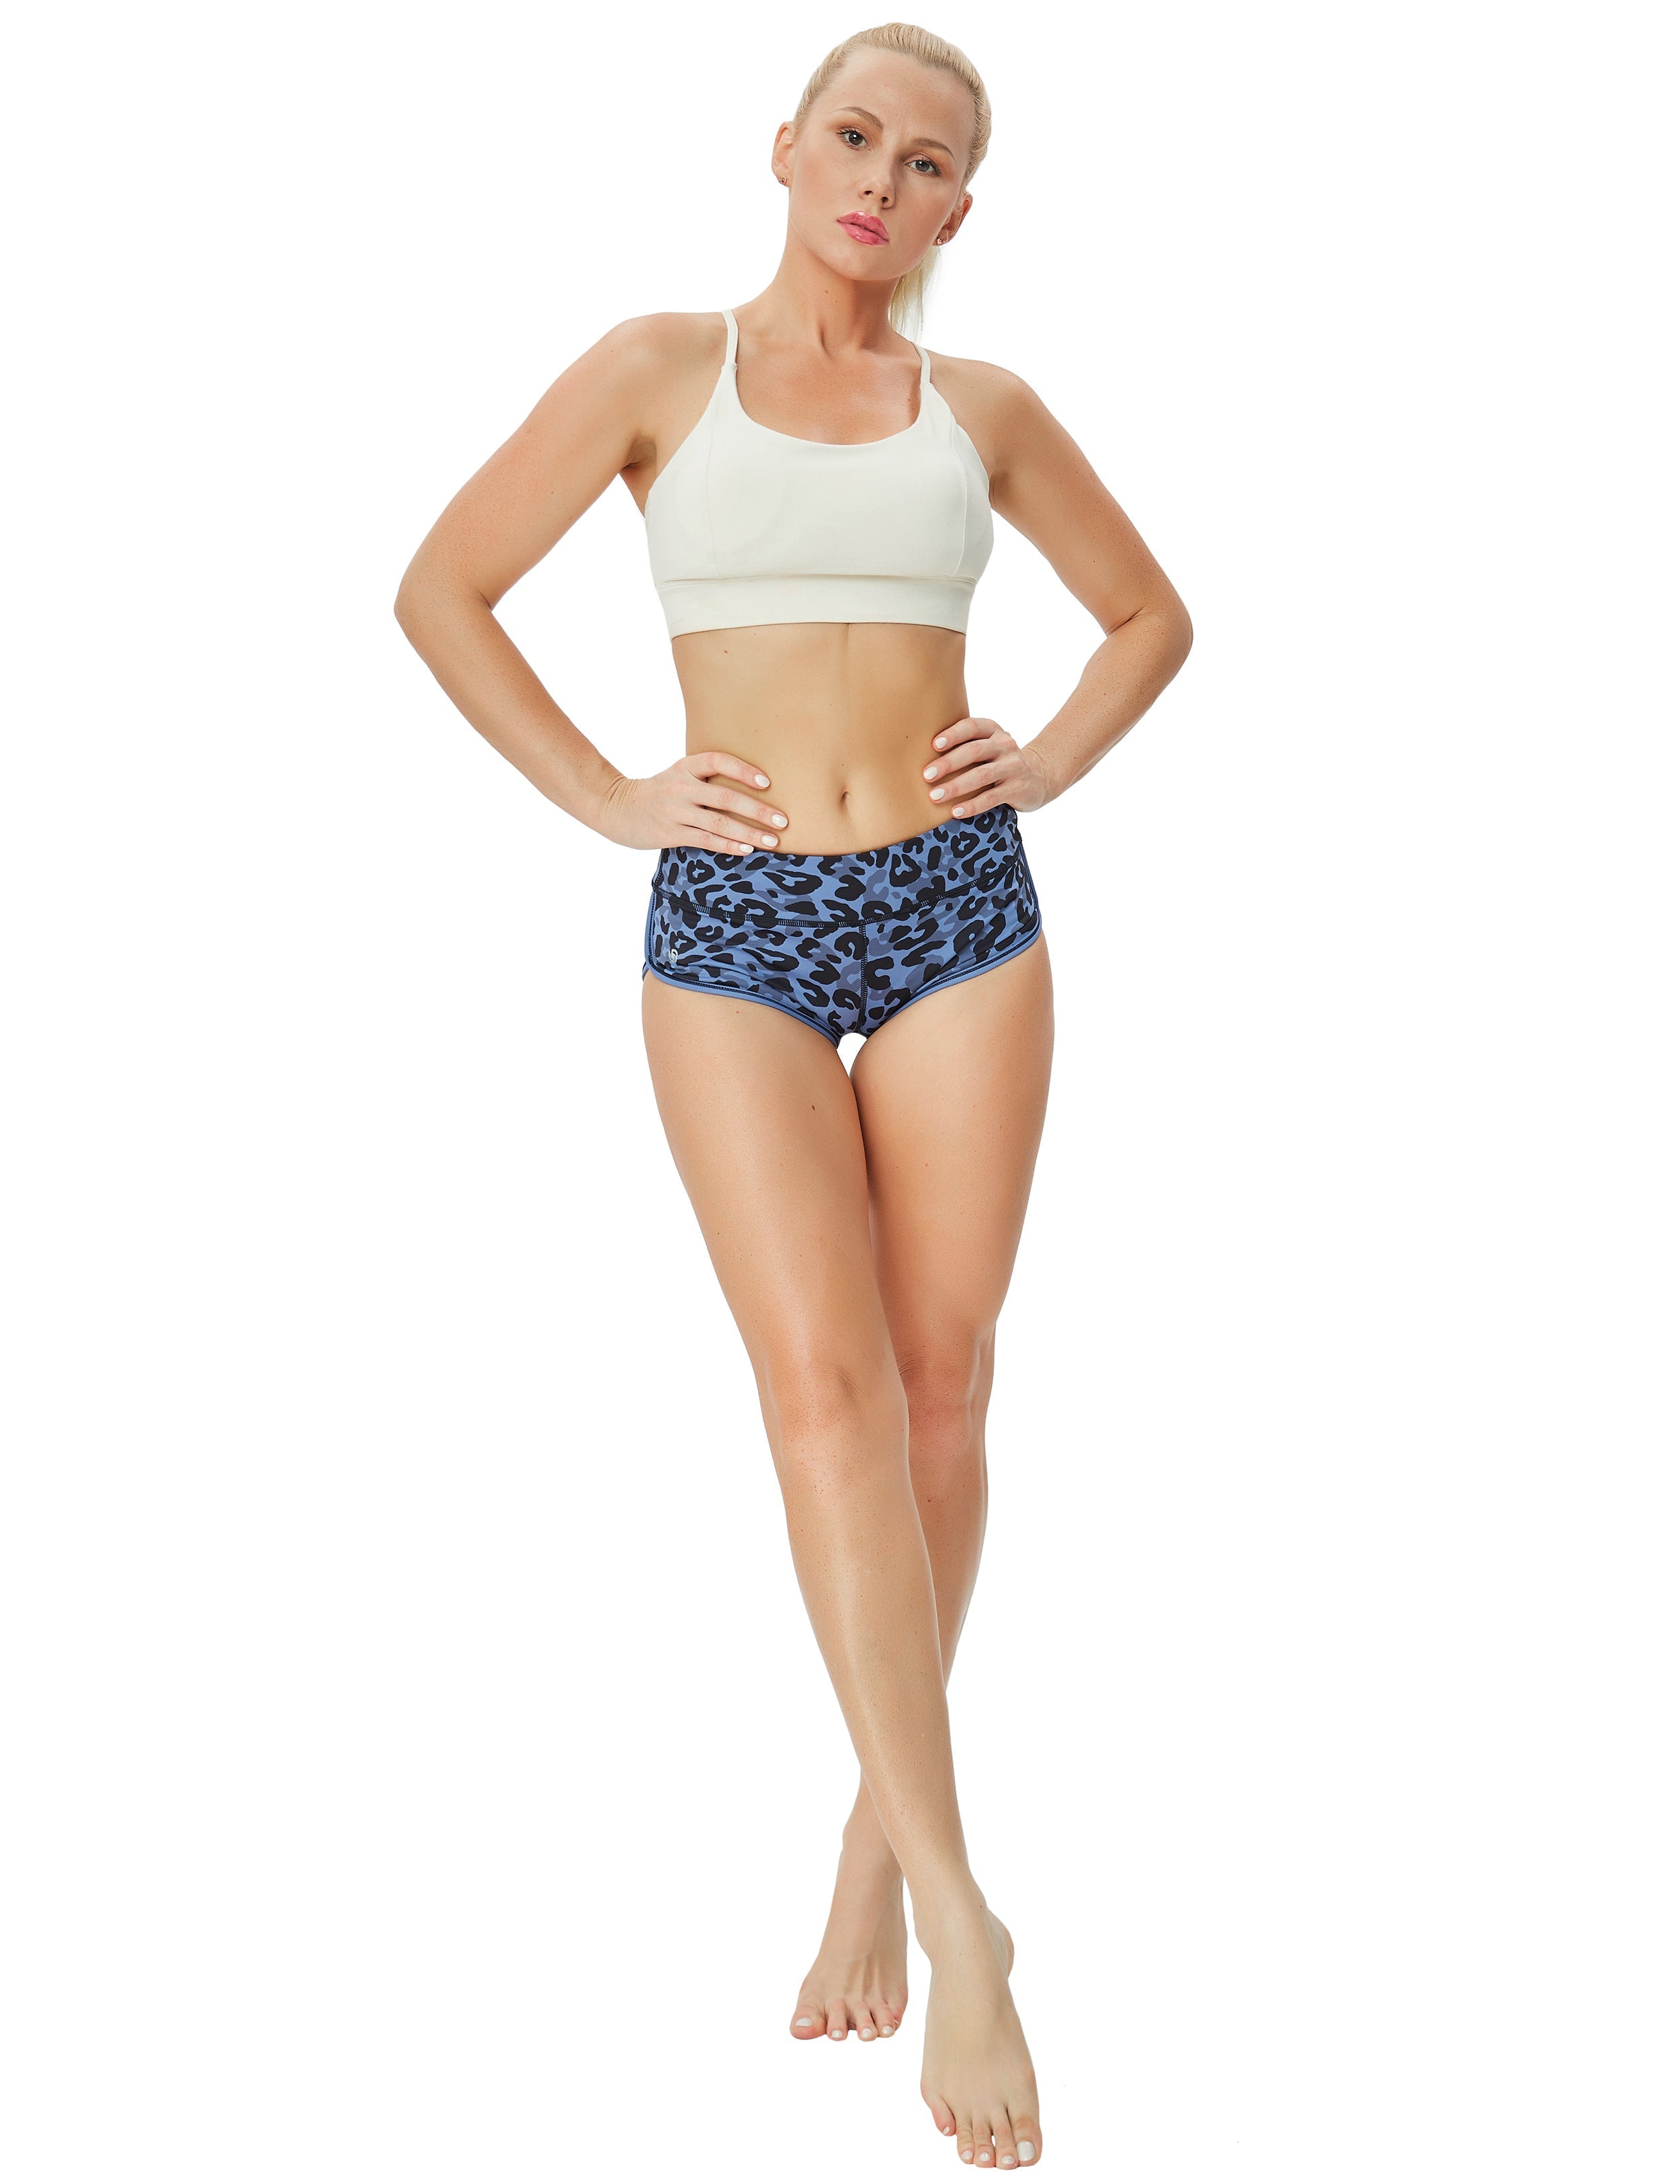 Printed Booty Plus Size Shorts navy_leopard Sleek, soft, smooth and totally comfortable: our newest sexy style is here. Softest-ever fabric High elasticity High density 4-way stretch Fabric doesn't attract lint easily No see-through Moisture-wicking Machine wash 78% Polyester, 22% Spandex